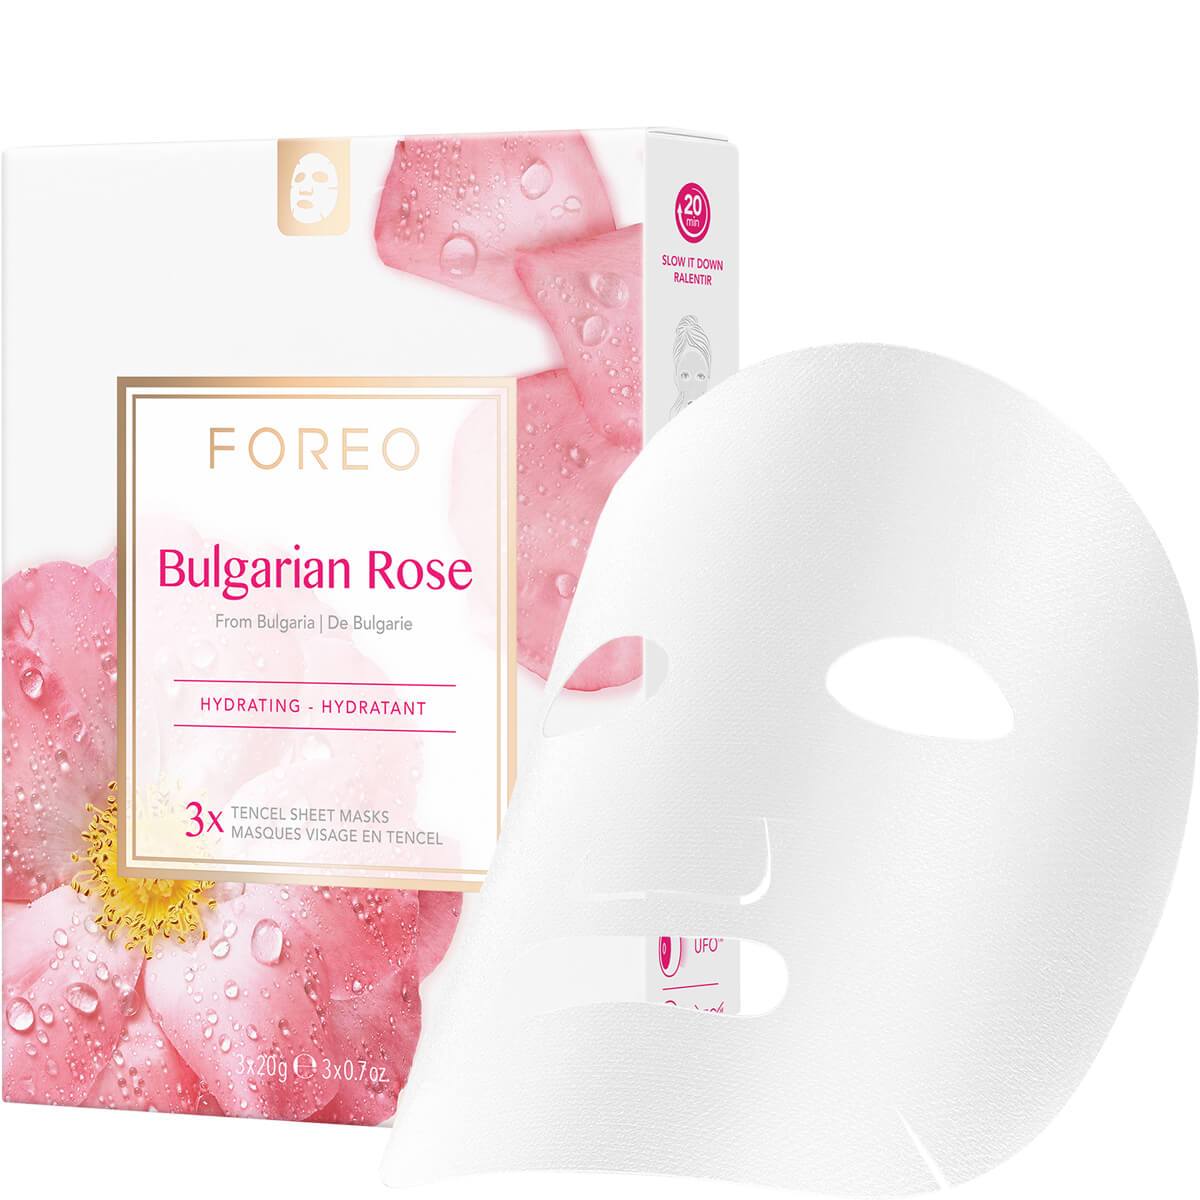 FOREO Bulgarian Rose Moisture-Boosting CurrentBody Face Mask Sheet US 